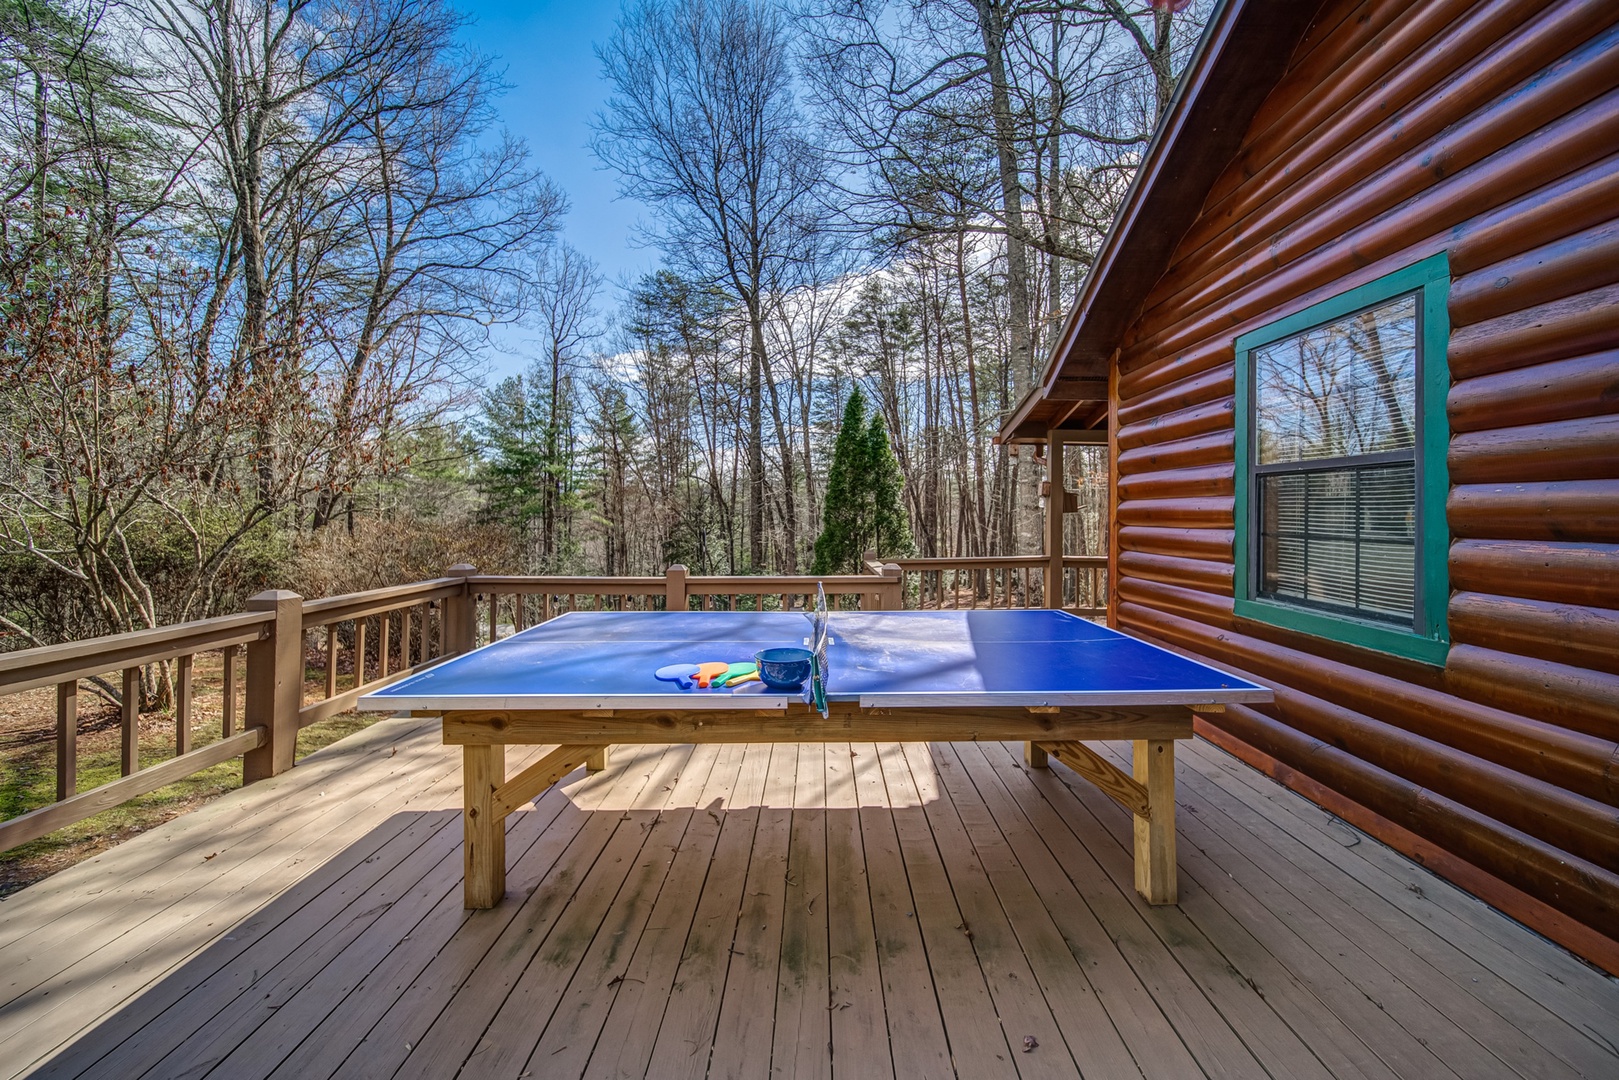 Bust out the Ping Pong Paddles and battle it out with friends and family